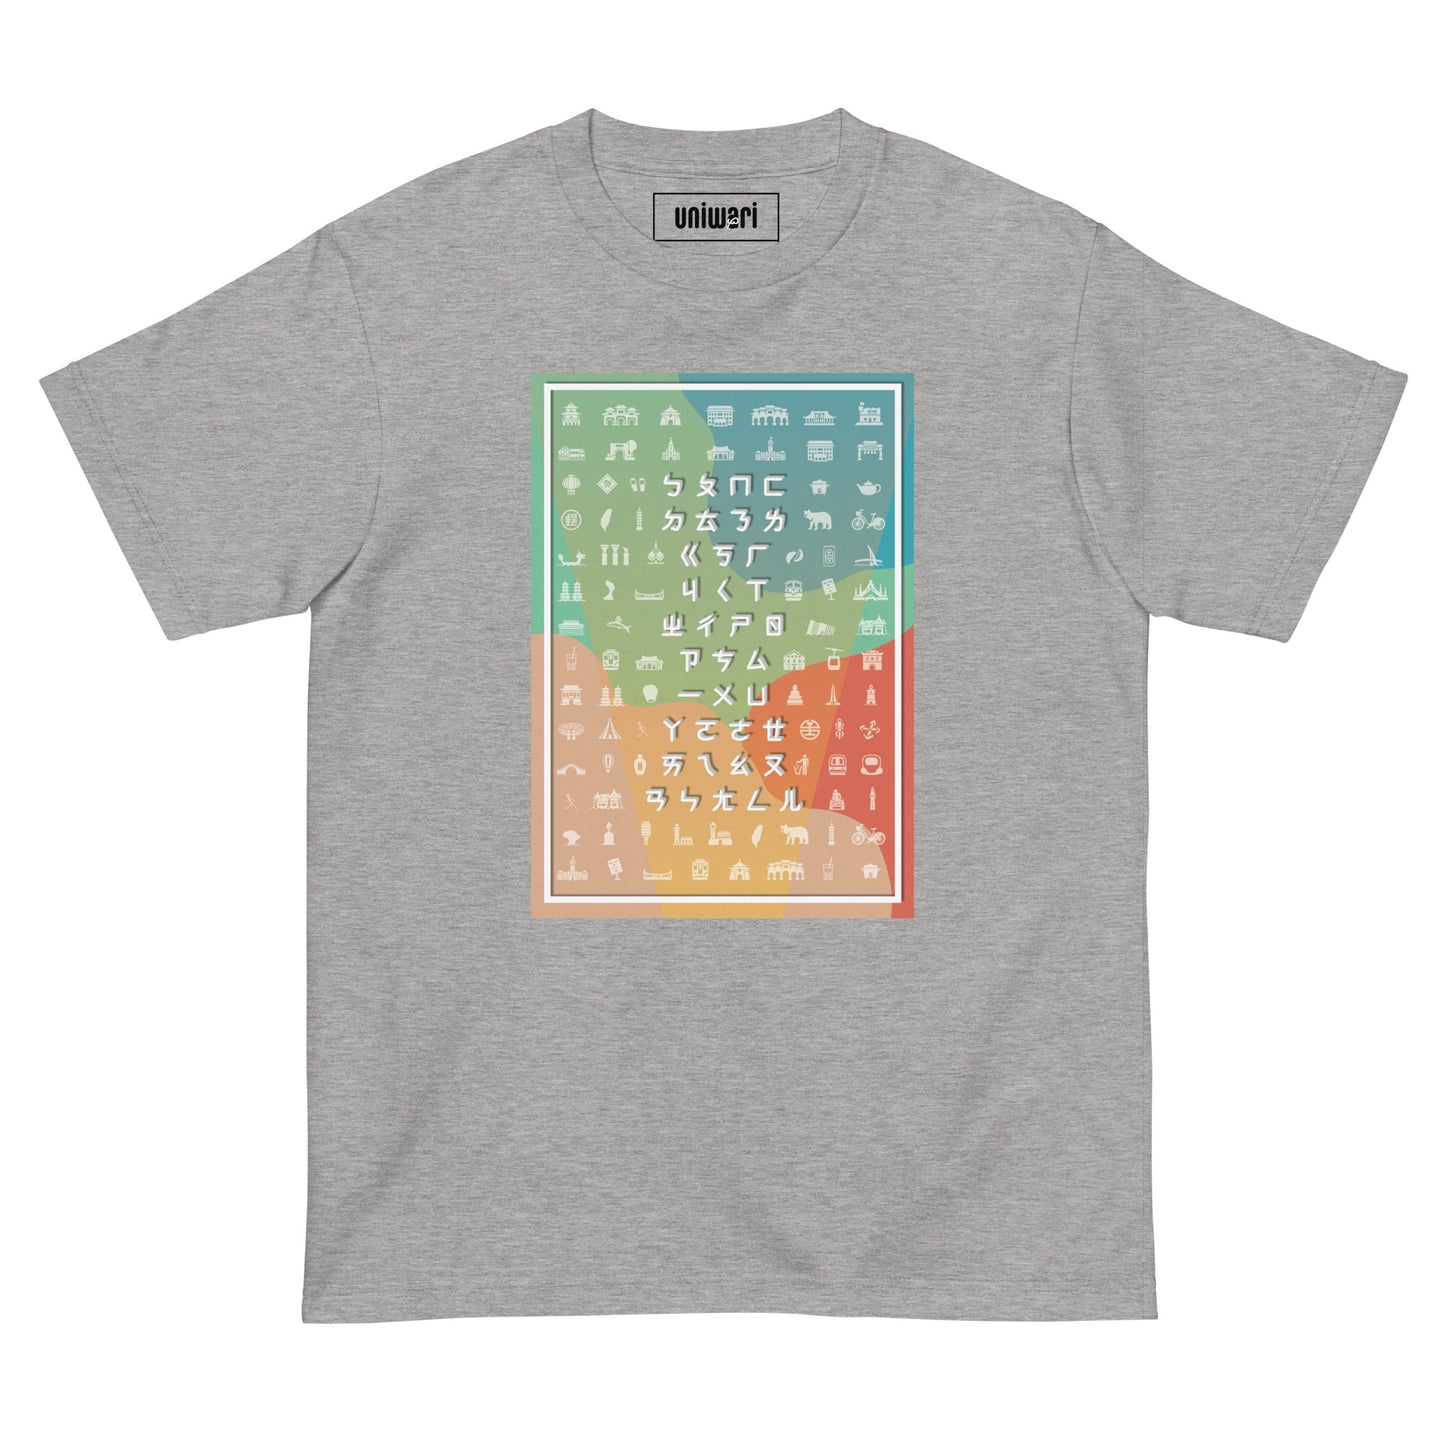 Light Gray High Quality Tee - Front Design with Taiwanese Alphabet